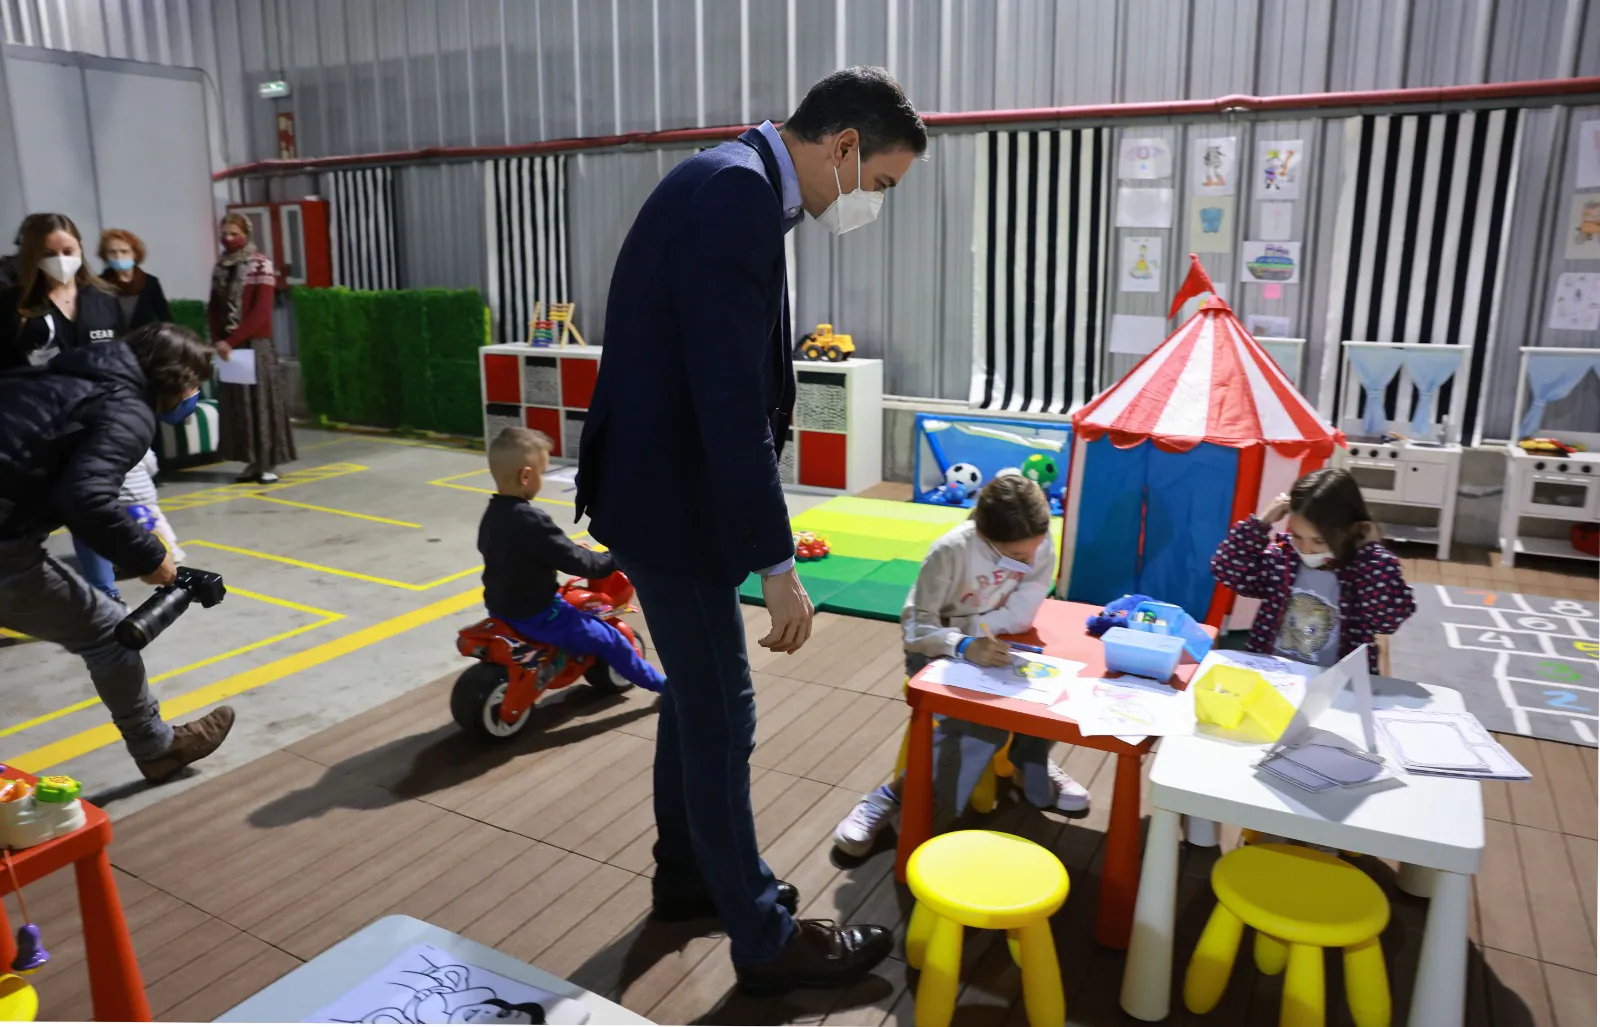 Spain's PM Pedro Sánchez has visited the facilities, where in two weeks some 2,200 people have already been helped, and to where prefabricated housing modules will be added to the Palacio de Ferias car park